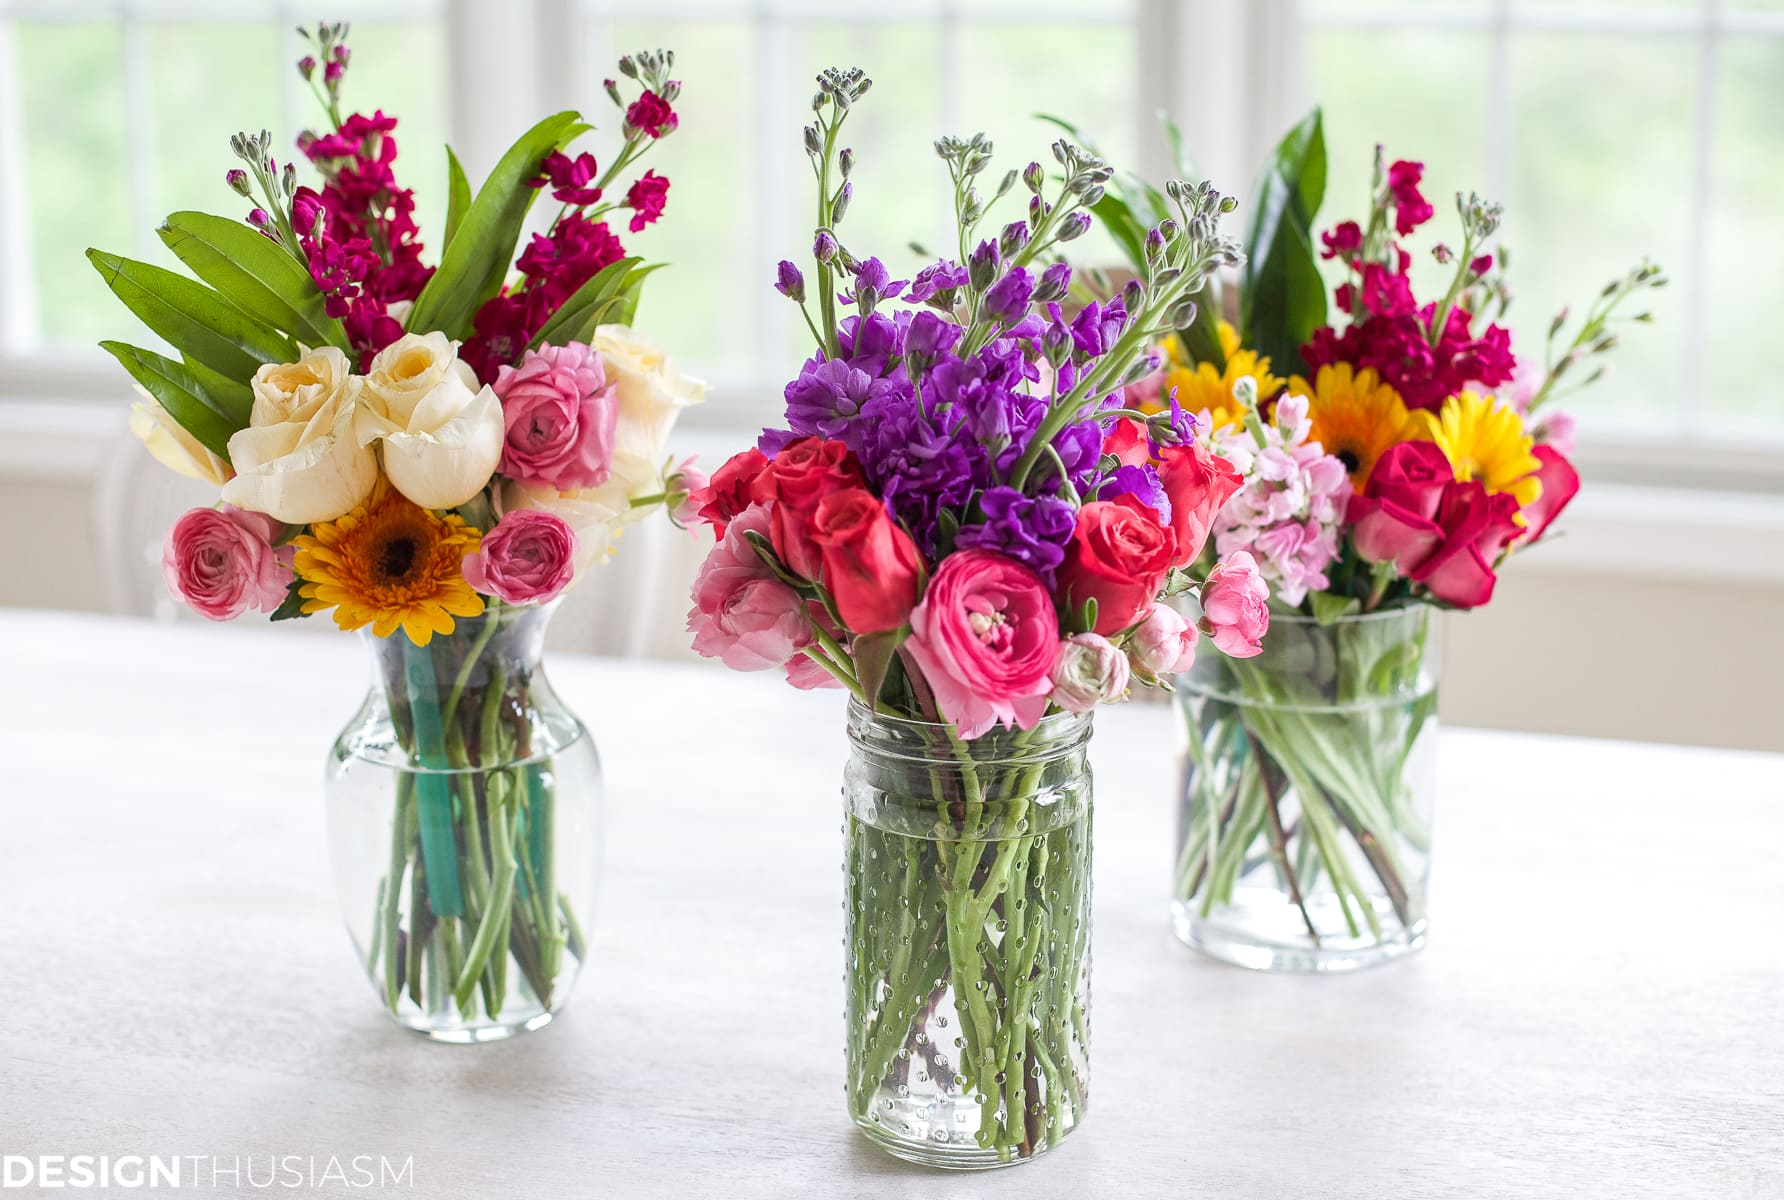 Home Style Saturdays: Arranging Spring Flowers Into Small Displays